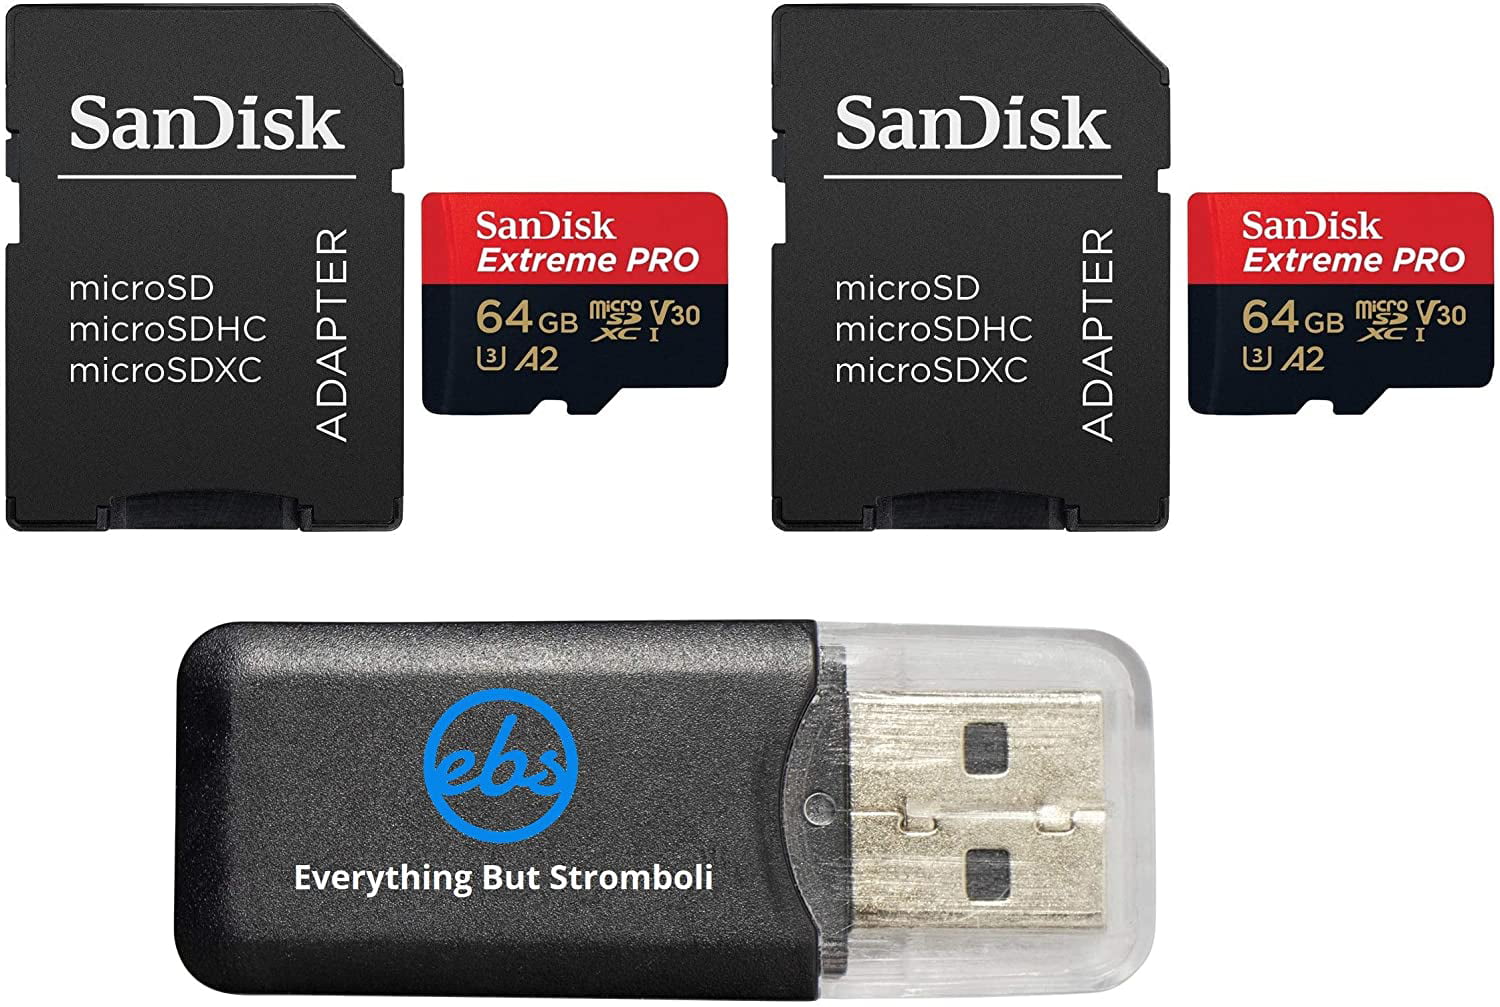 SanDisk 128GB Micro Memory Card Extreme Pro Works with Insta360 